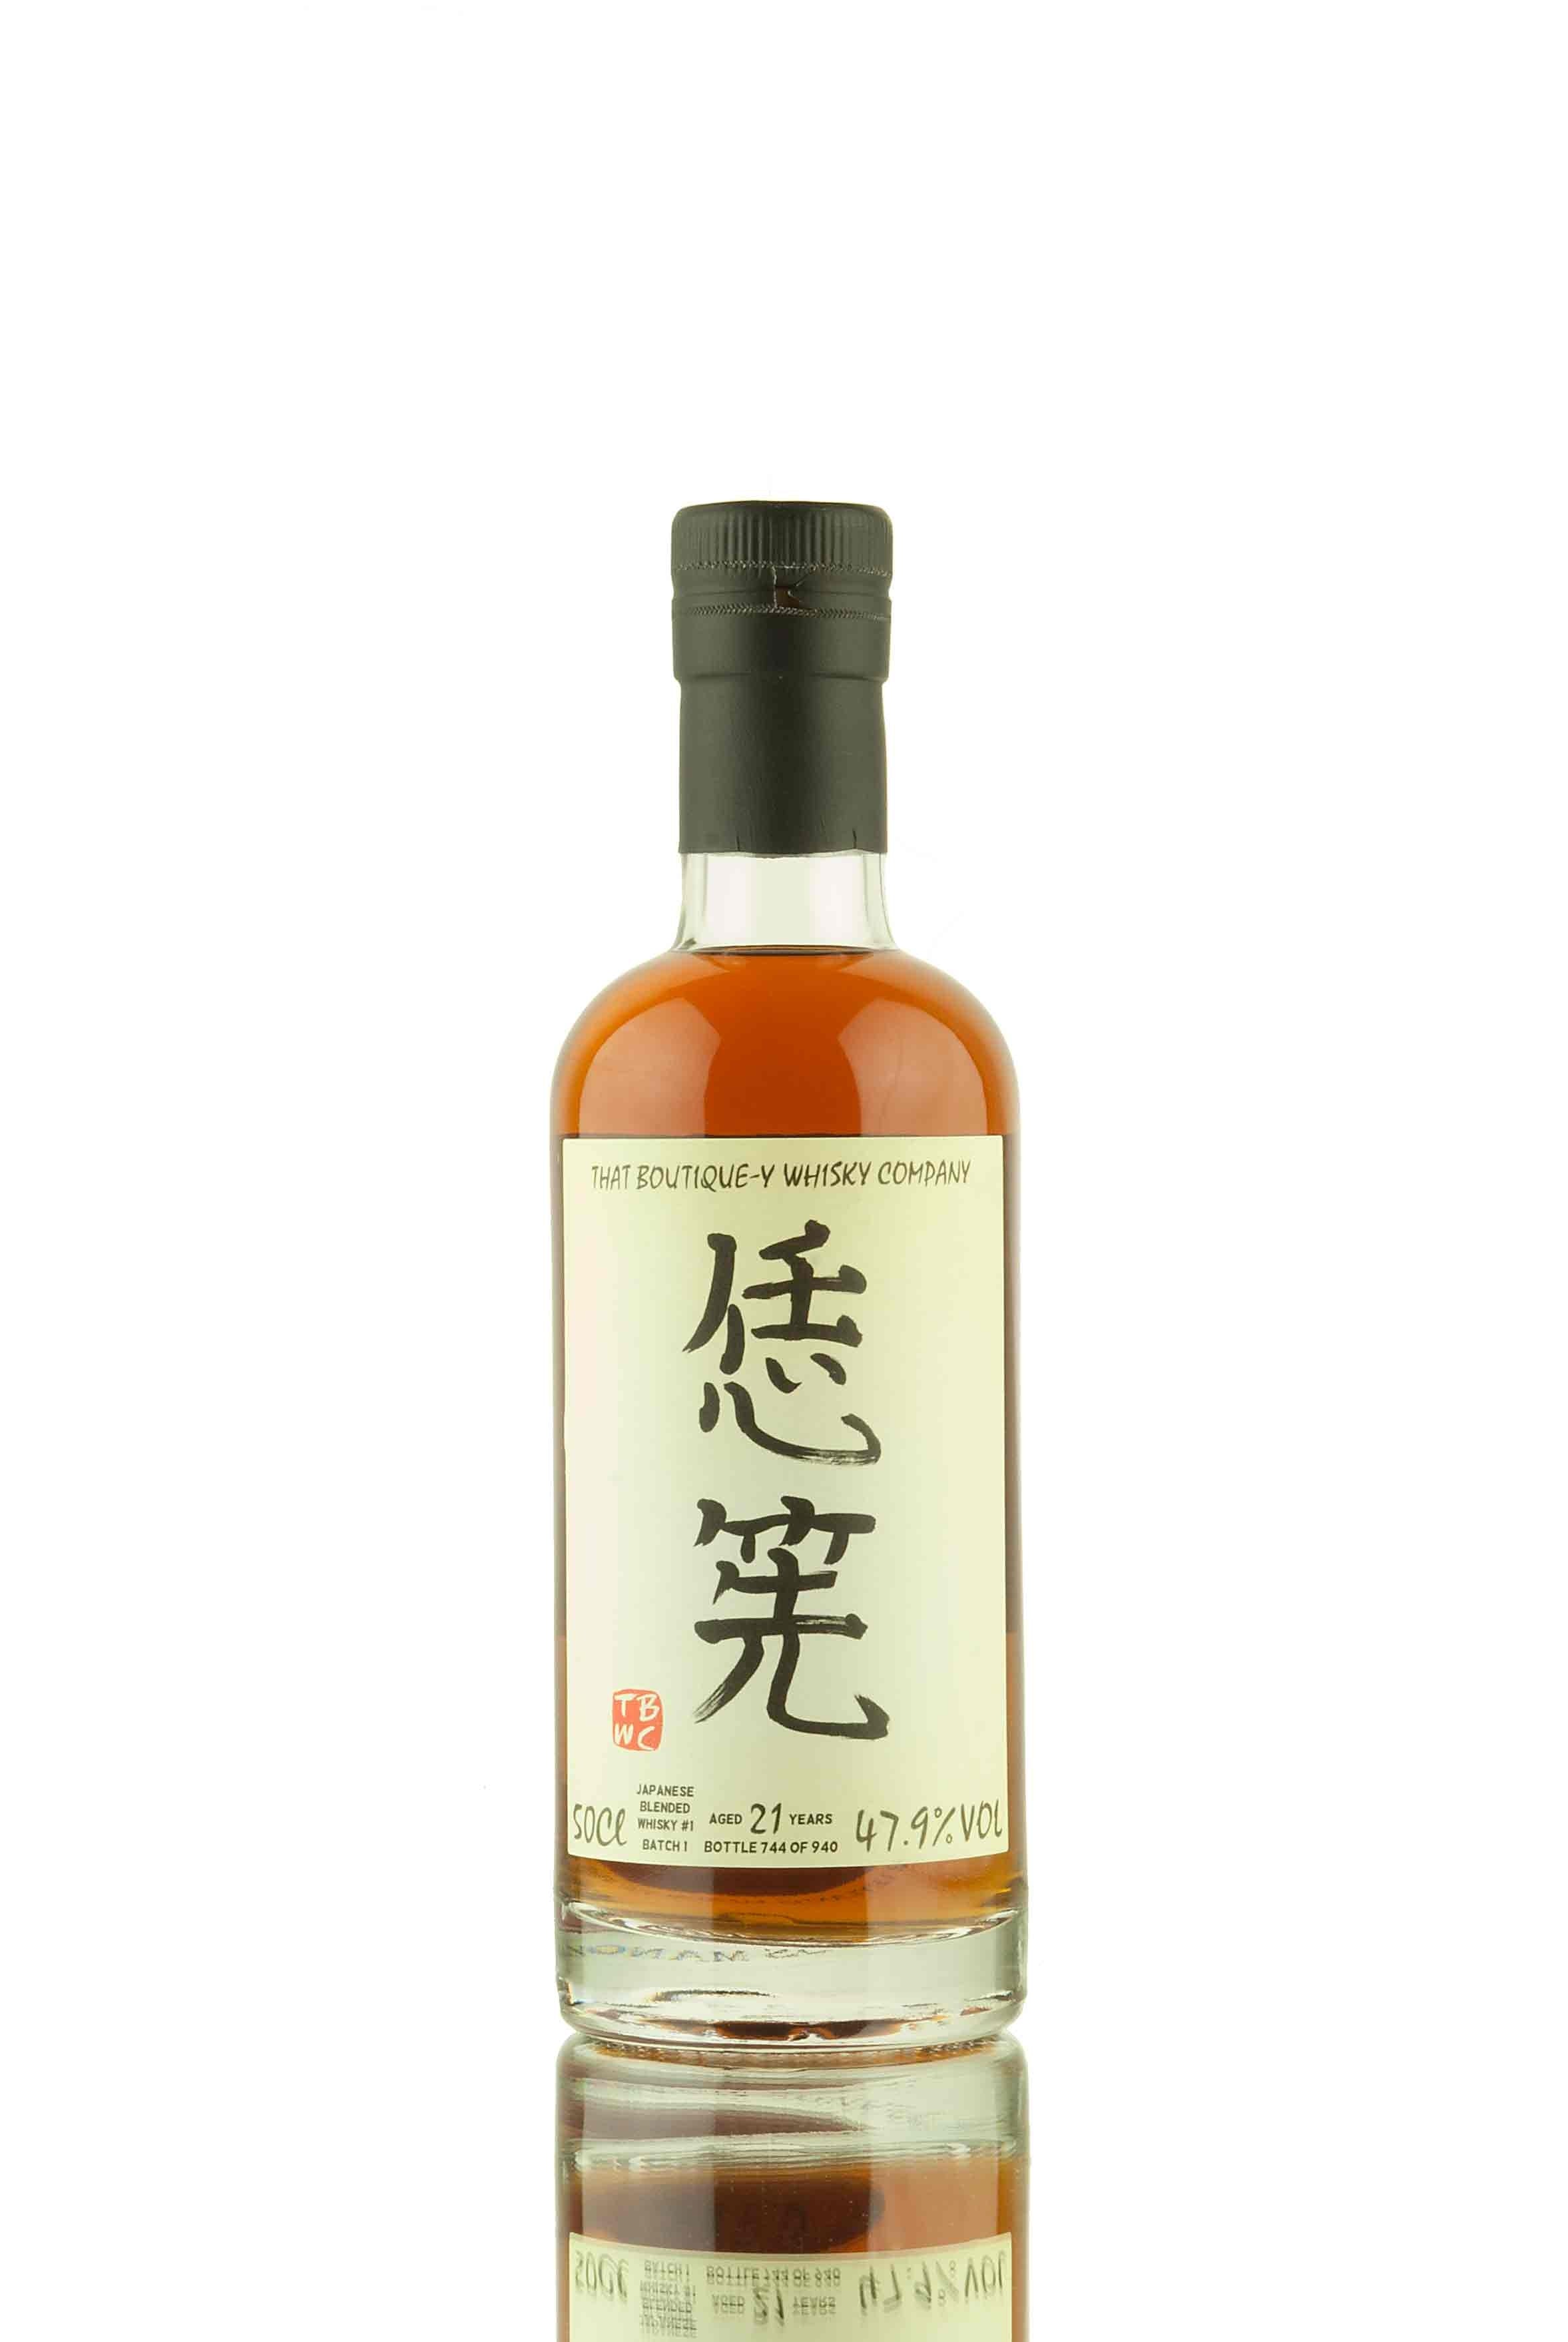 Japanese Blended Whisky #1 21 Year Old | TBWC